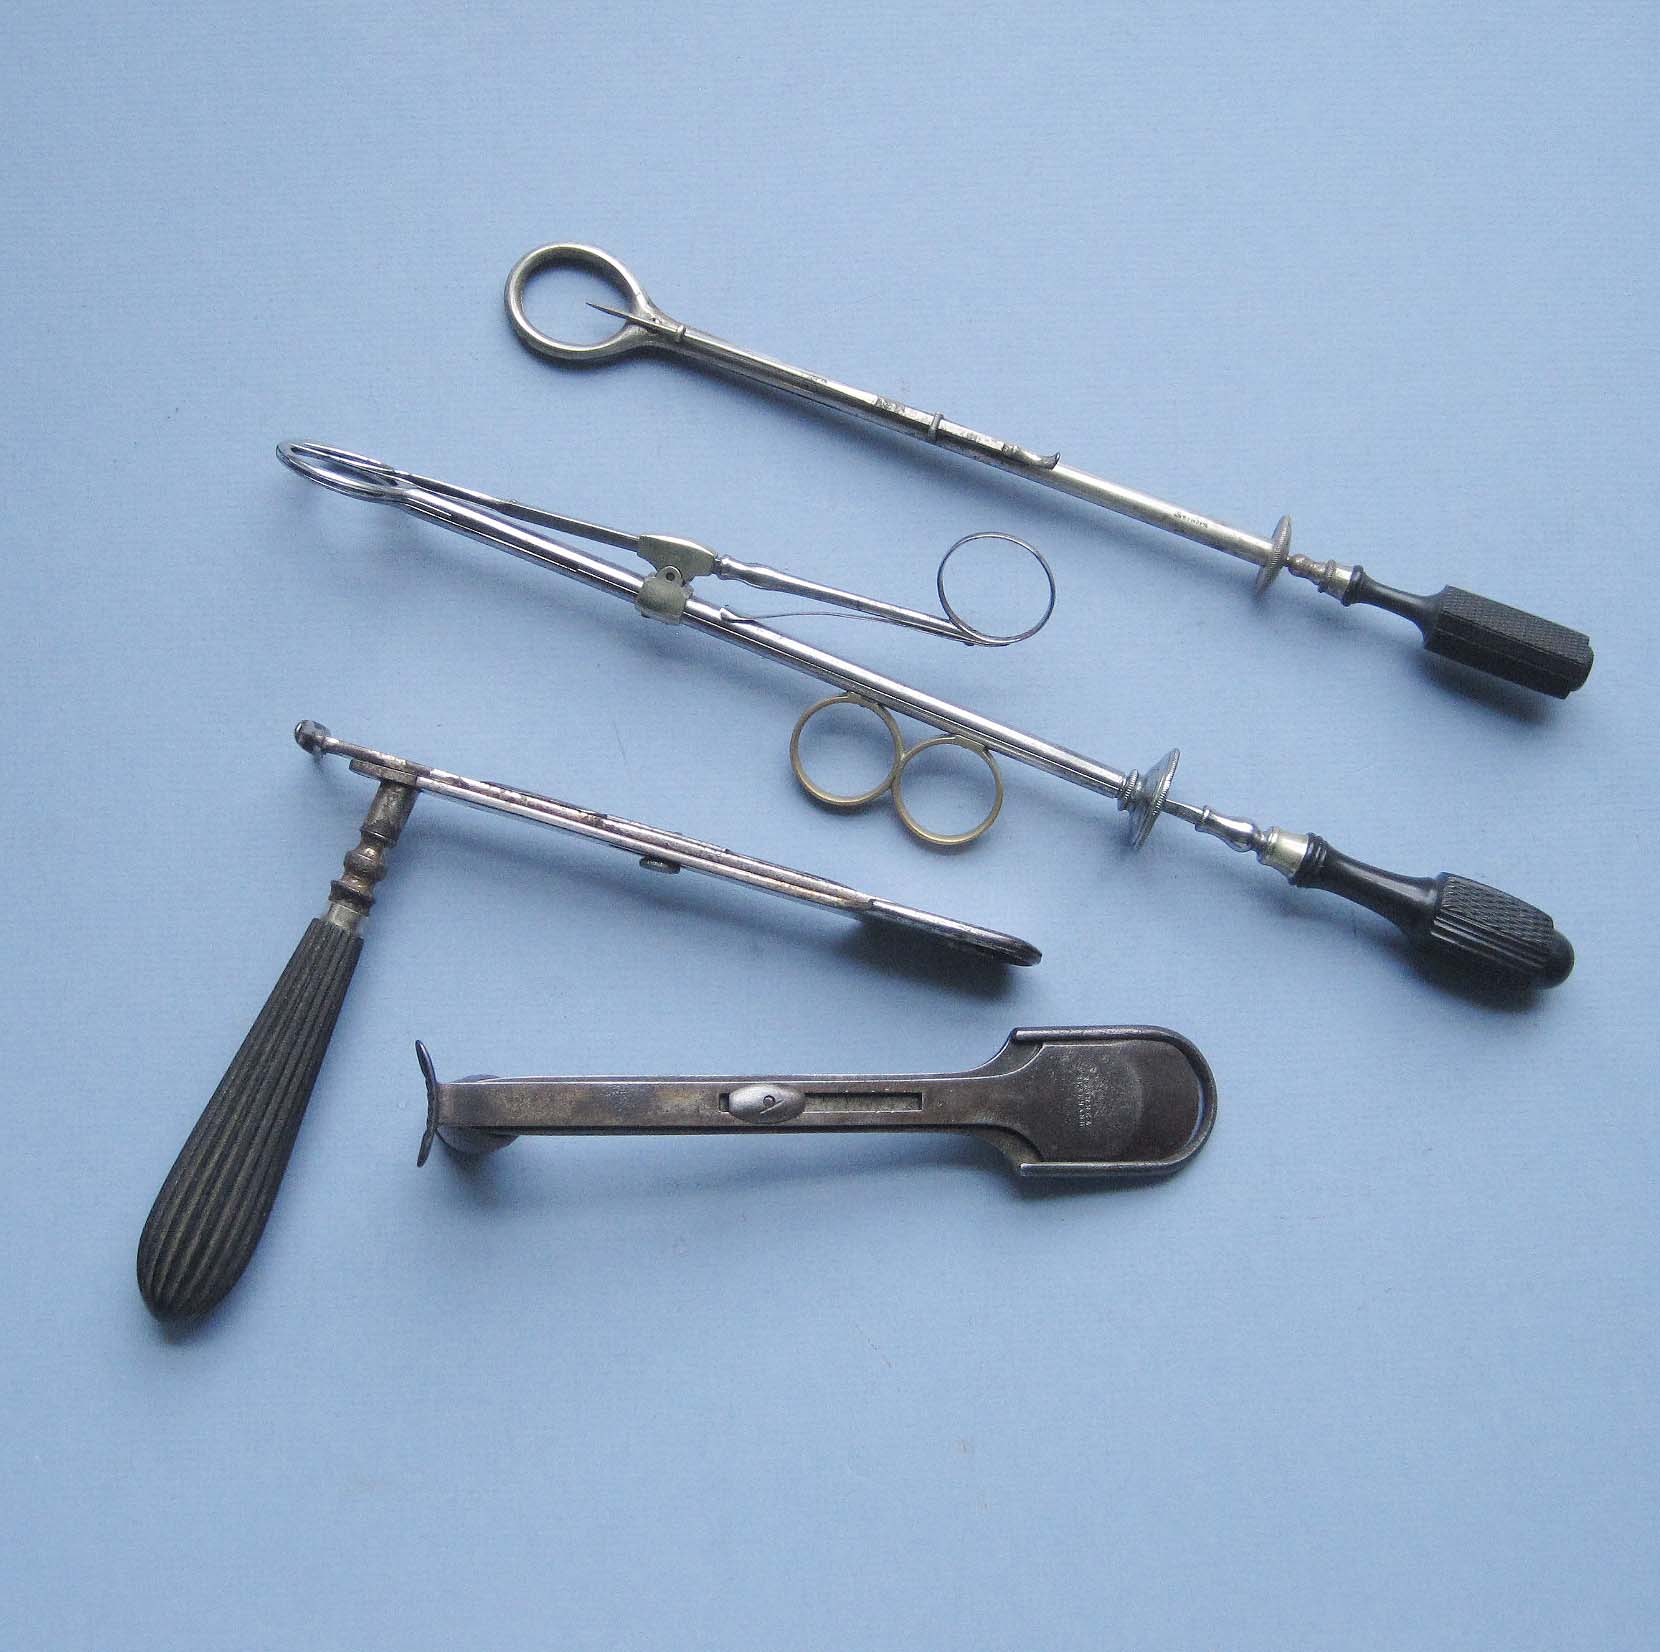 FOUR 19TH-CENTURY TONSIL GUILLOTINES